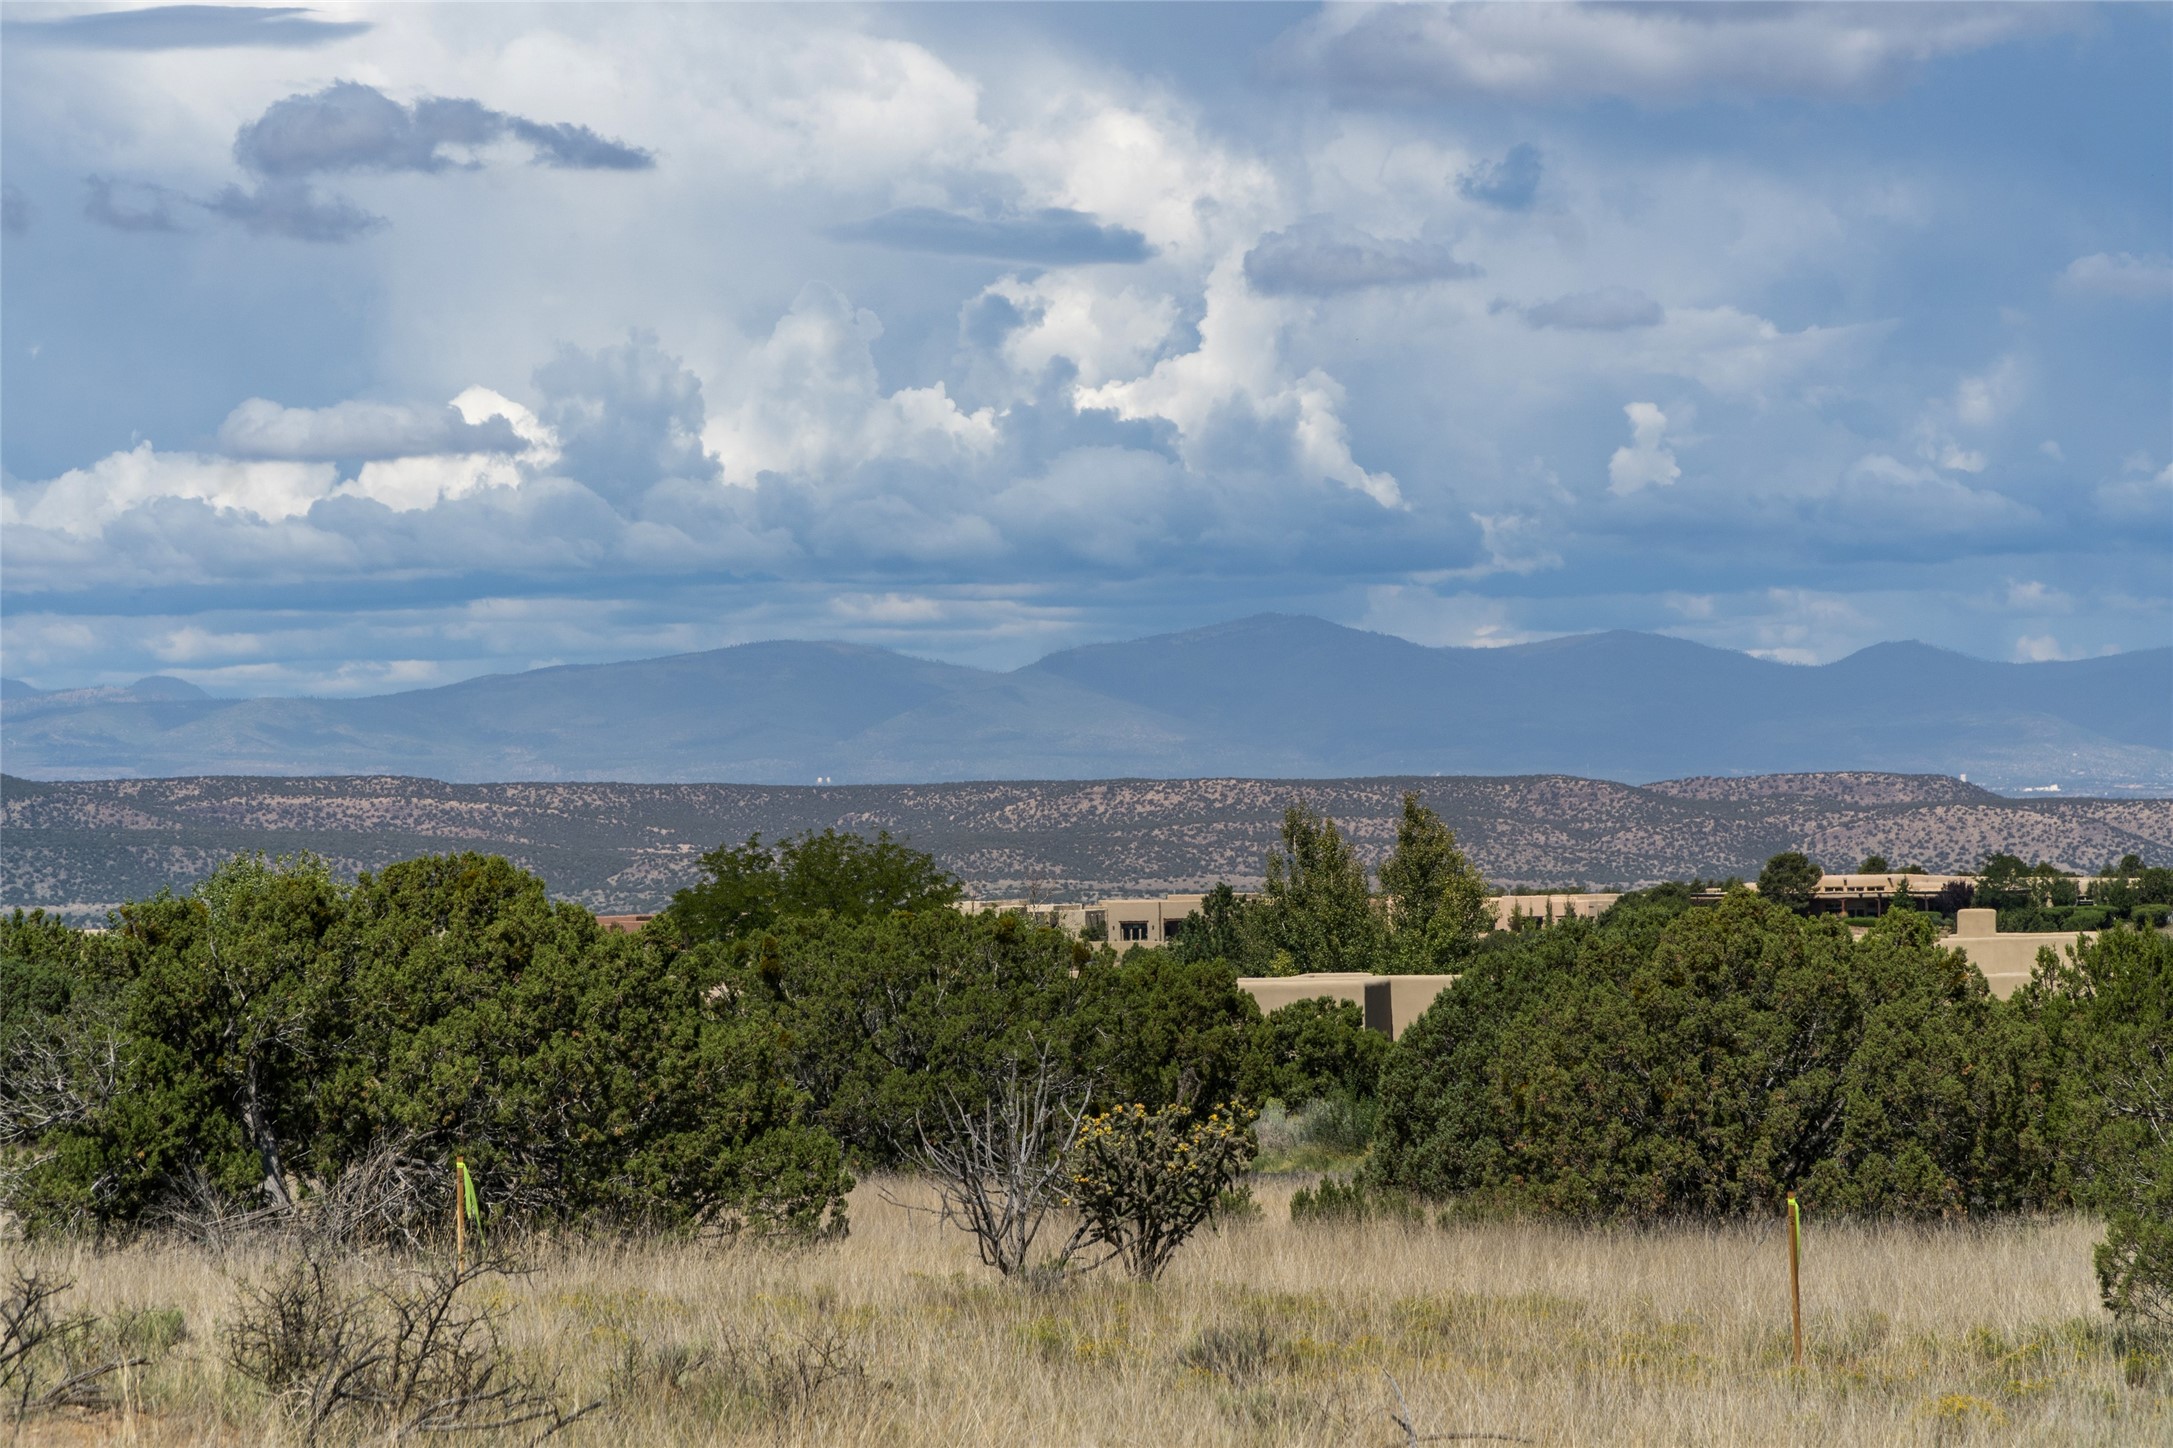 Views of the Jemez Mountains to the West